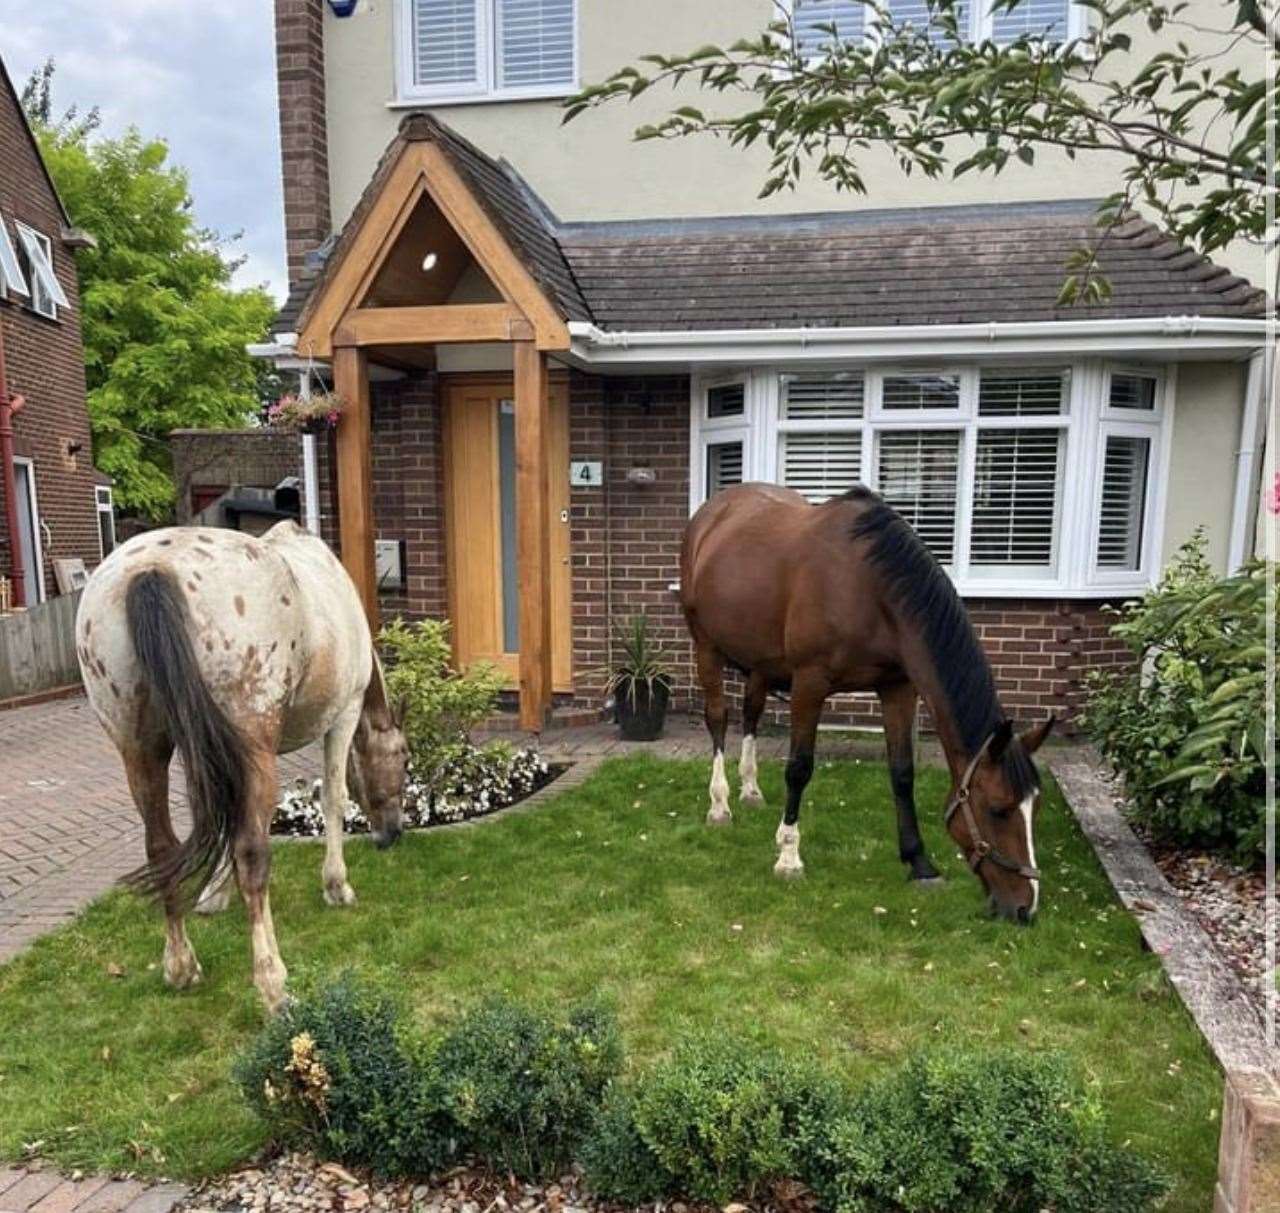 They were seen nibbling grass in a front garden